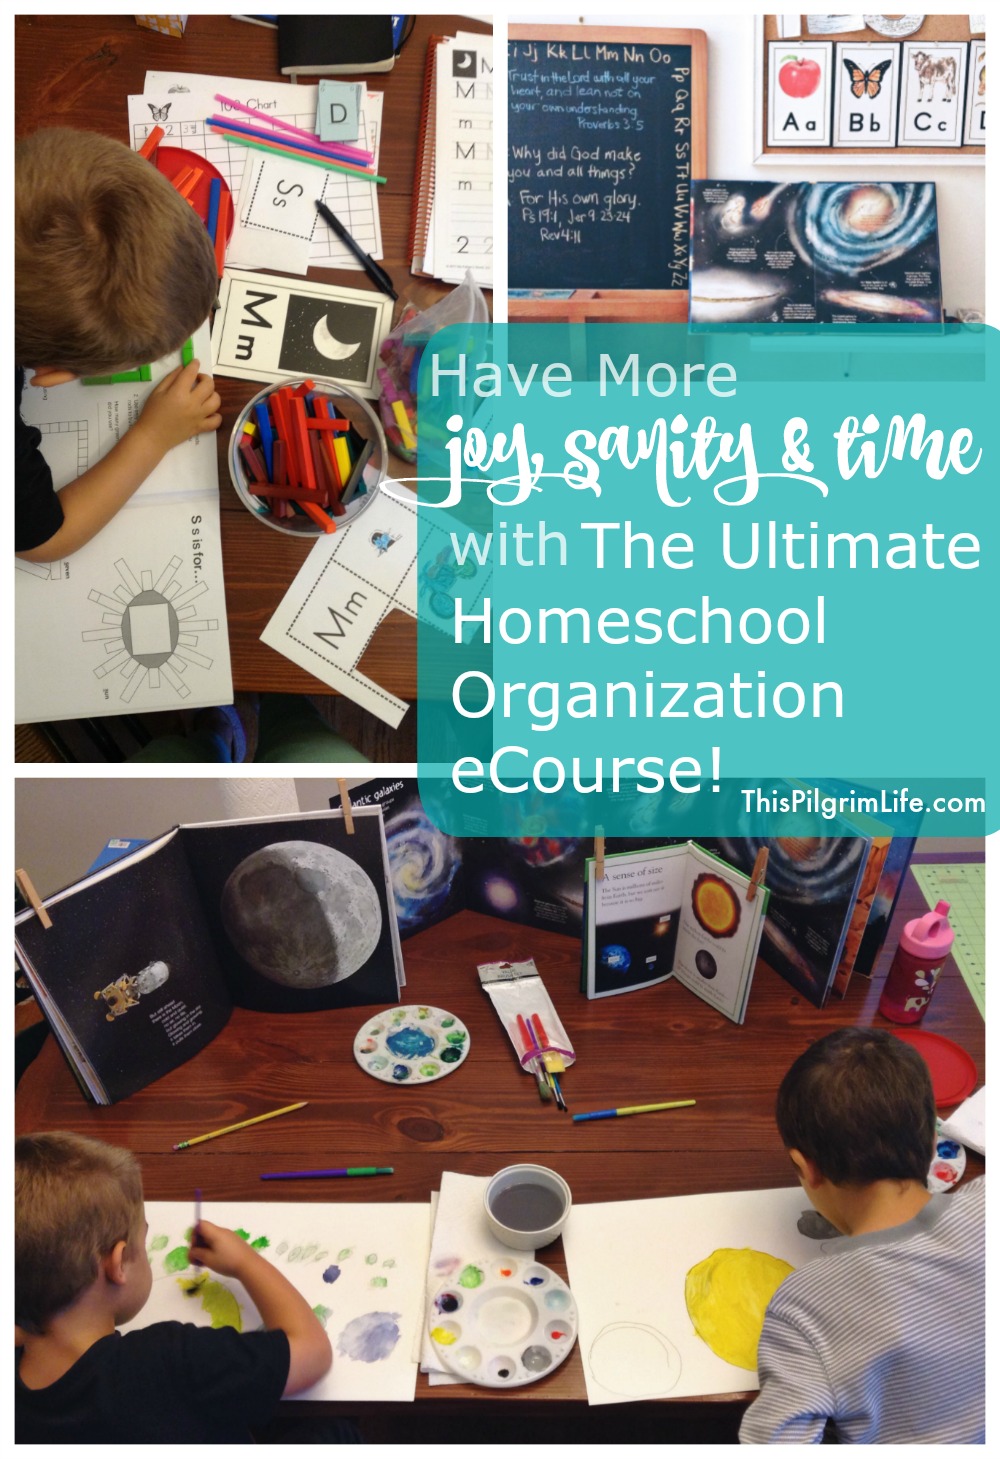 Every homeschool mom could use a little more joy, sanity, and time! Check out this amazing resource that gives tips, plans, and encouragements for a more joy-filled and successful homeschool! 